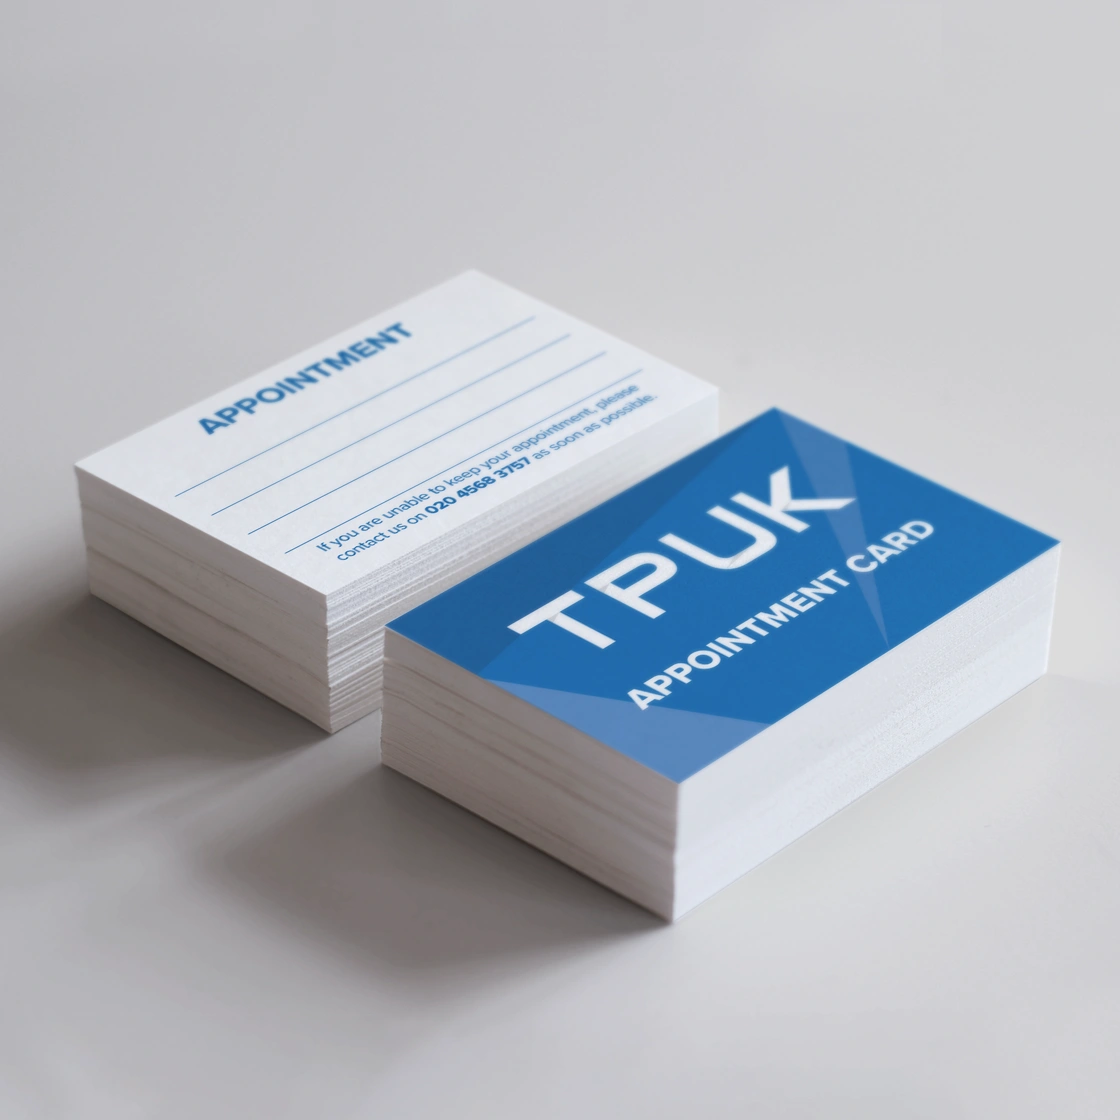 Custom Printed Appointment Cards from TradePrintingUK